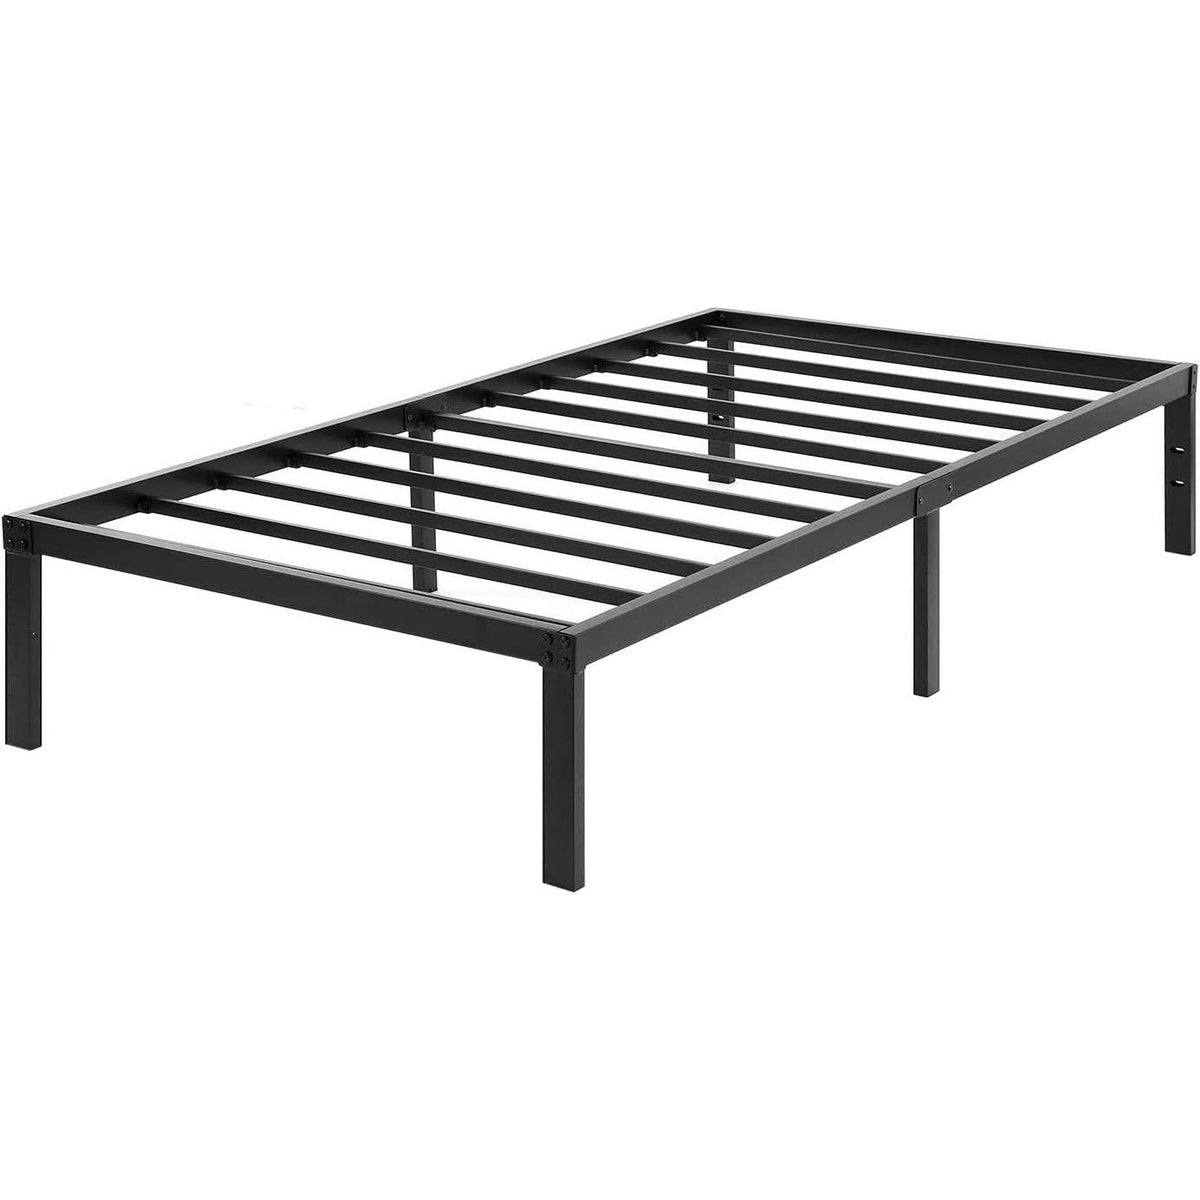 Twin XL 16-inch Heavy Duty Metal Bed Frame with 3,000 lbs Weight Capacity